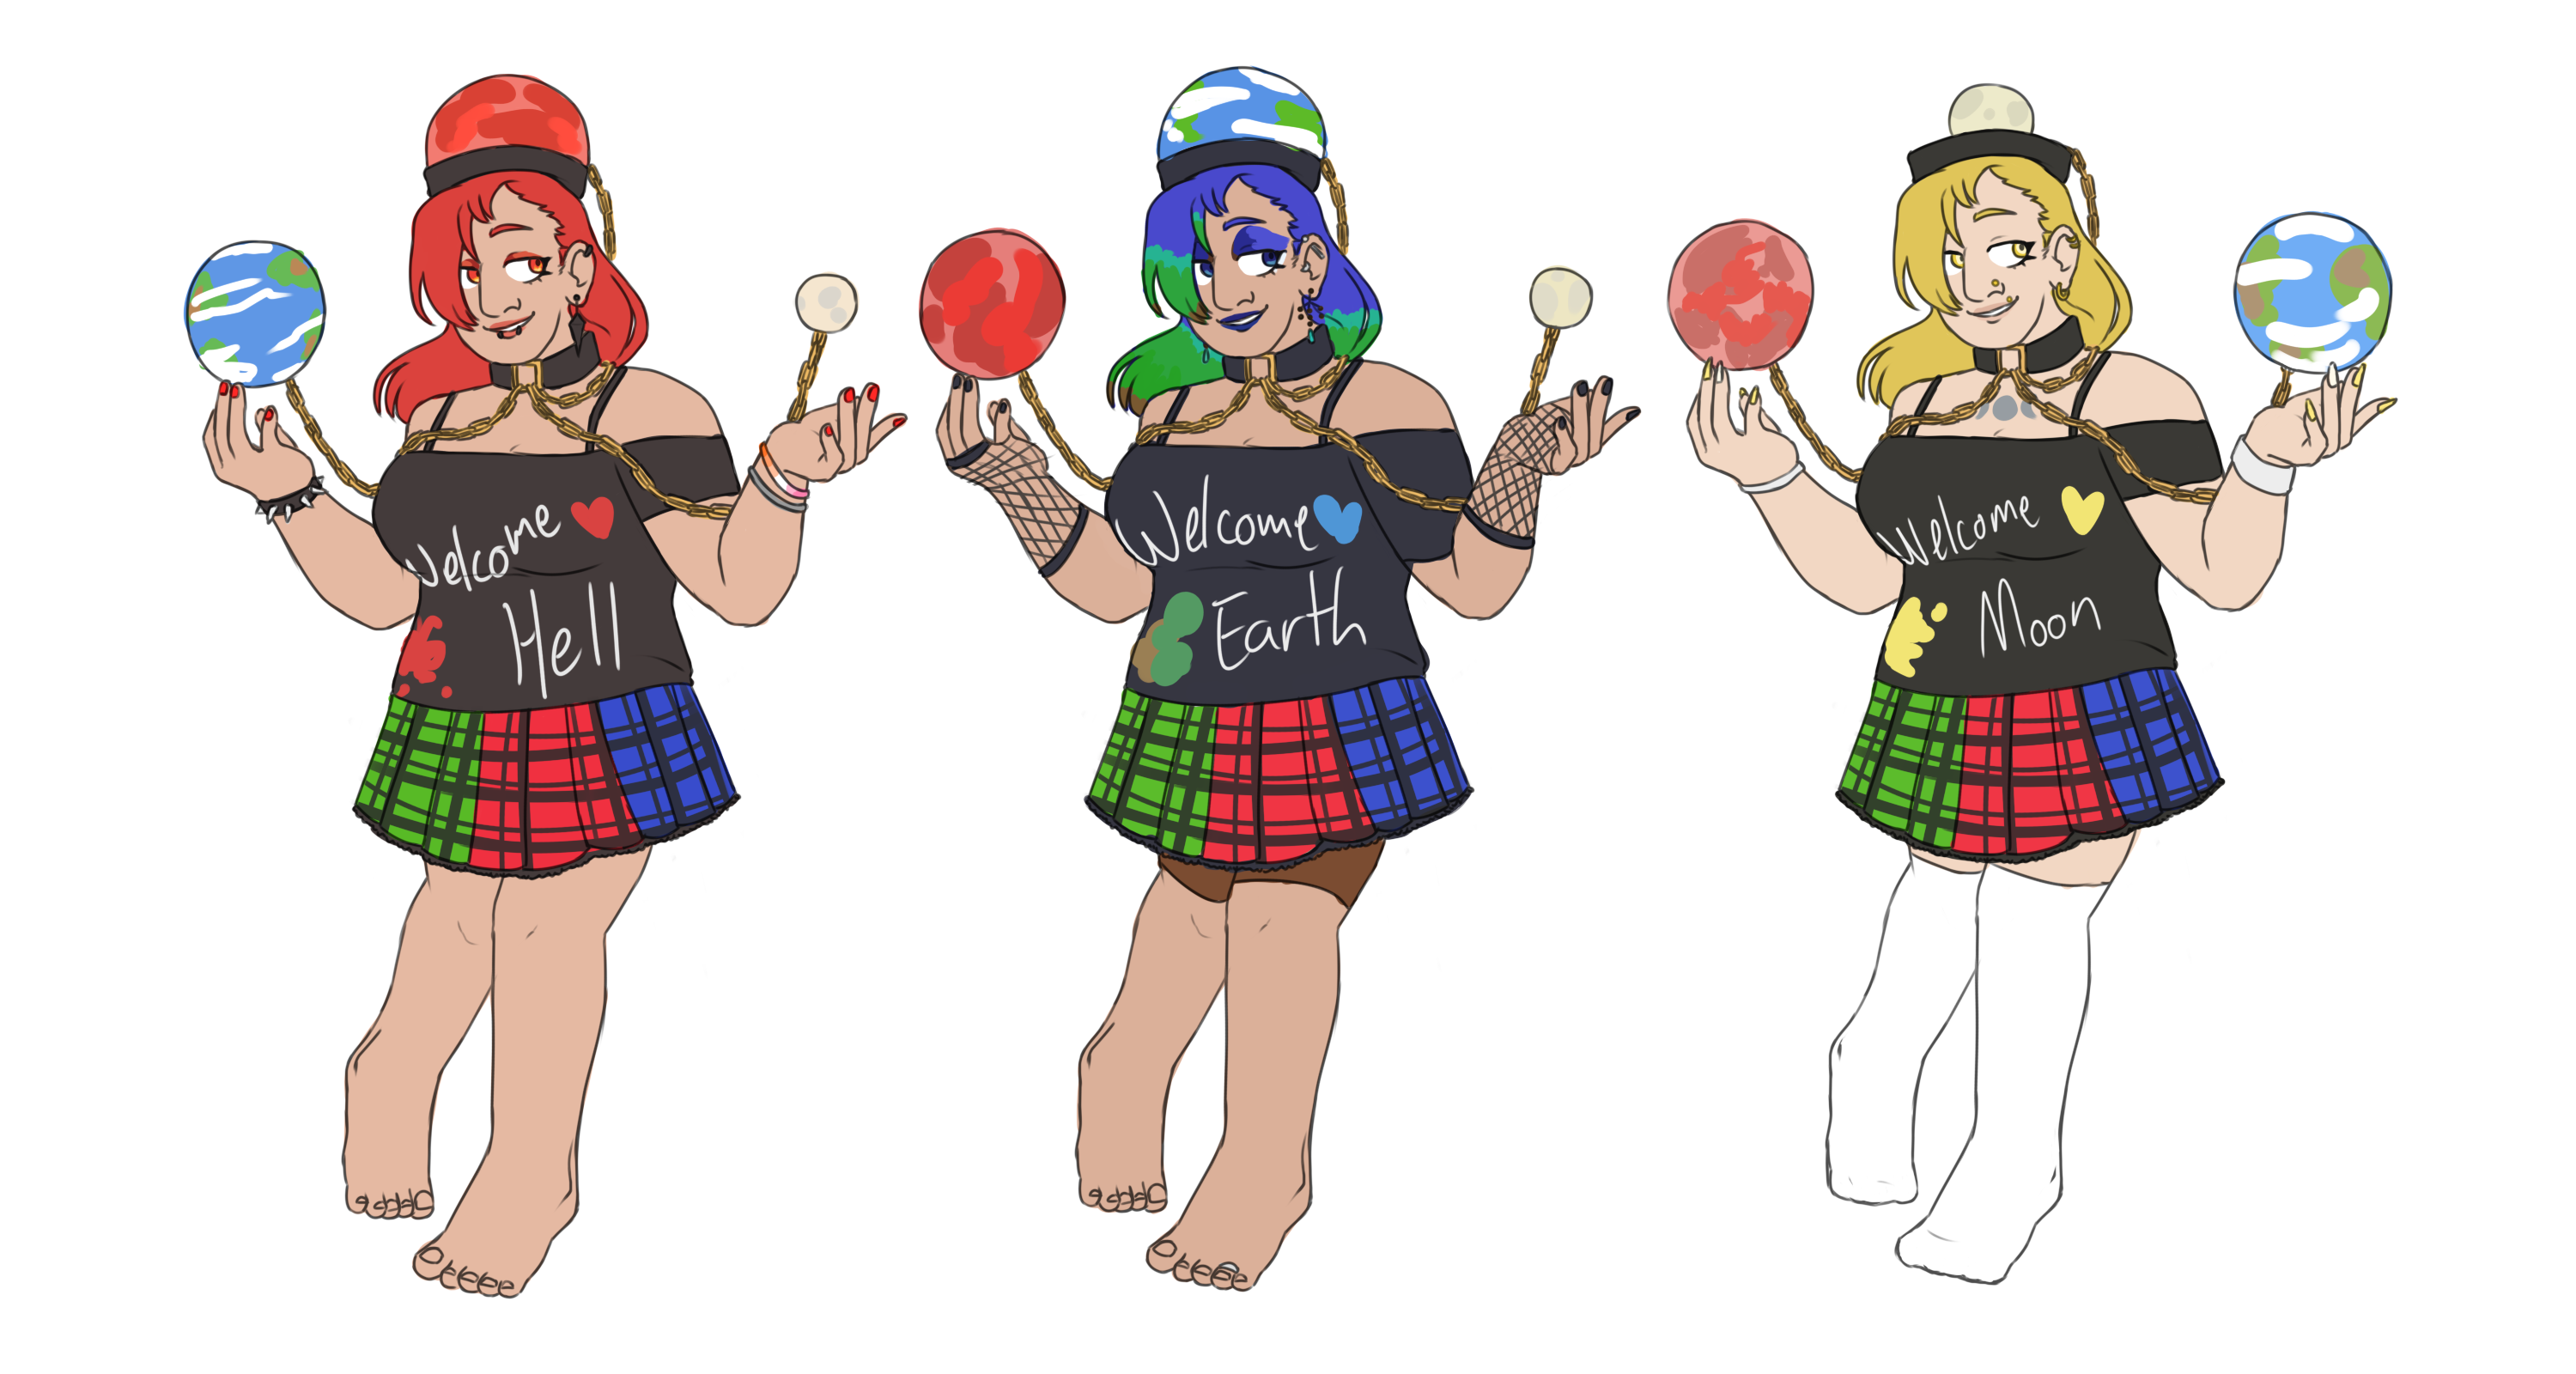 a drawing of Hecatia Lapislazuli from Touhou. All 3 of her bodies are depicted. The only differences between each body are the color scheme, the text on her shirt, and the accessories and makeup